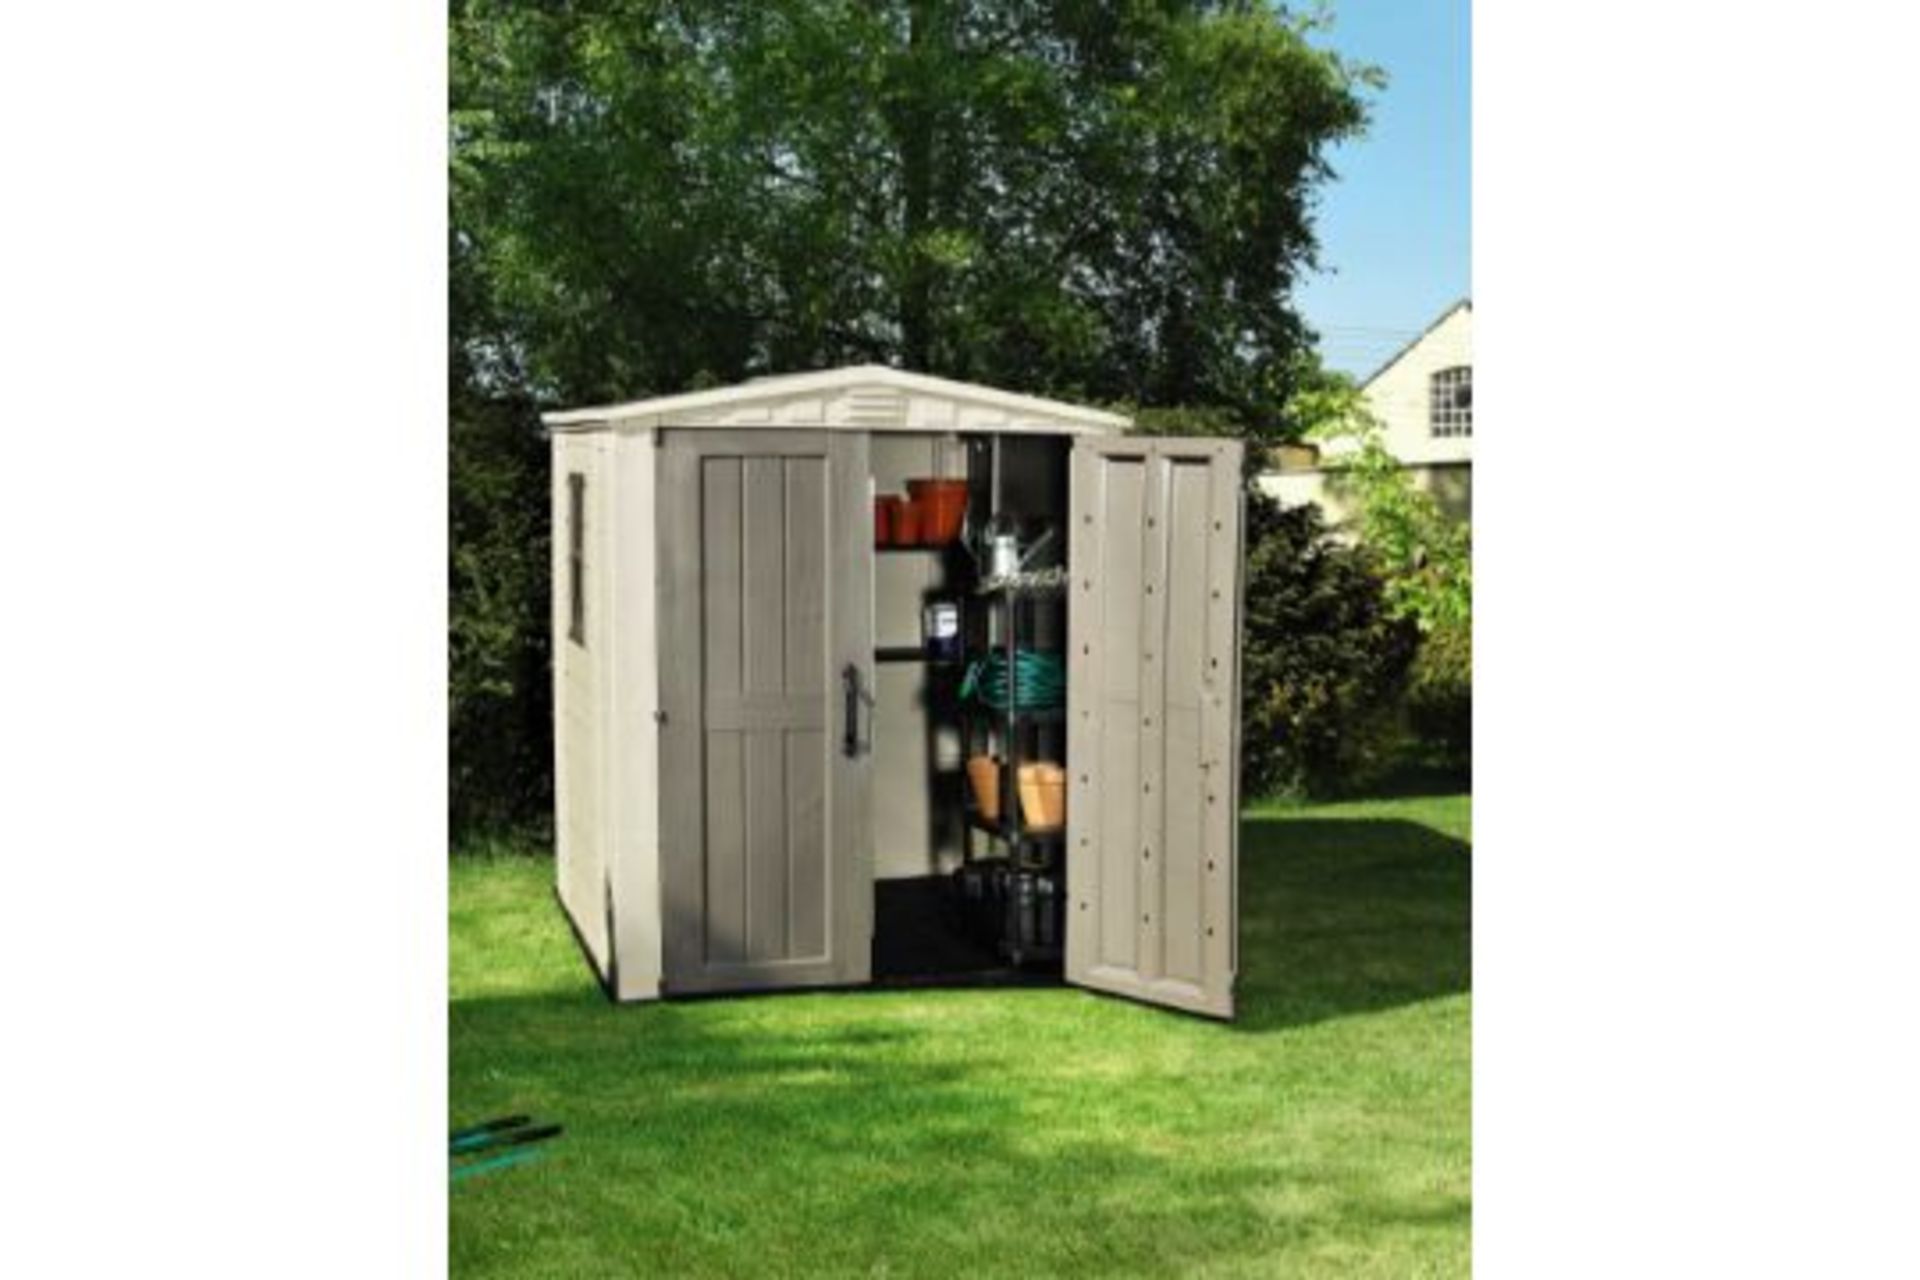 New Keter Factor Garden Plastic Shed. Dimensions: 178 x 195.5 x 208cm (approx.) Material: Resin, - Image 2 of 7